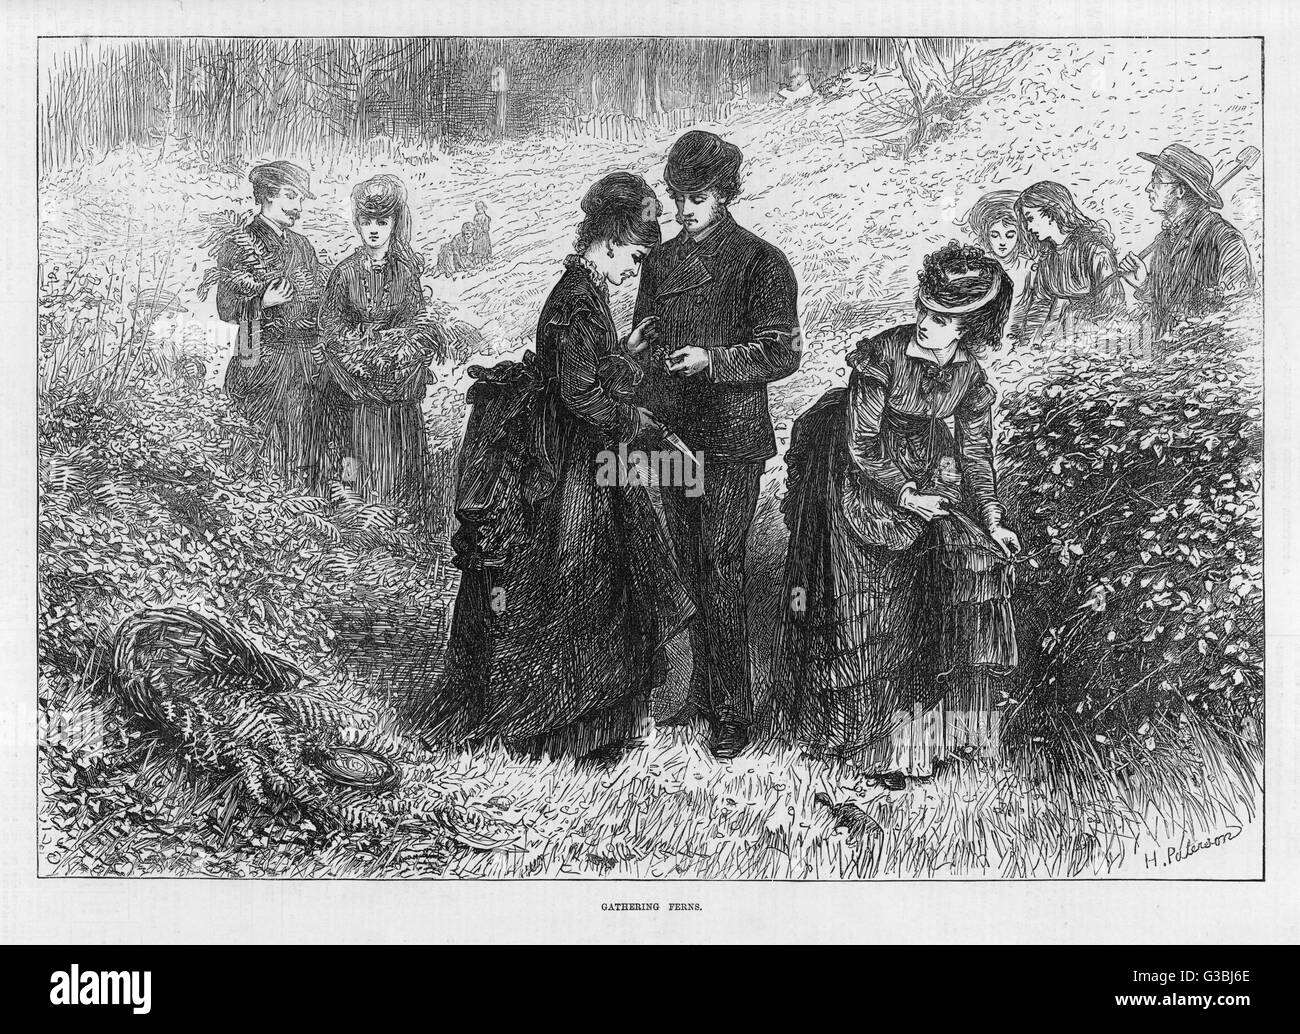 Ladies and gentlemen engaging  in the popular pastime of  fern hunting.  They would  gather ferns for decorative  purposes.       Date: 1871 Stock Photo